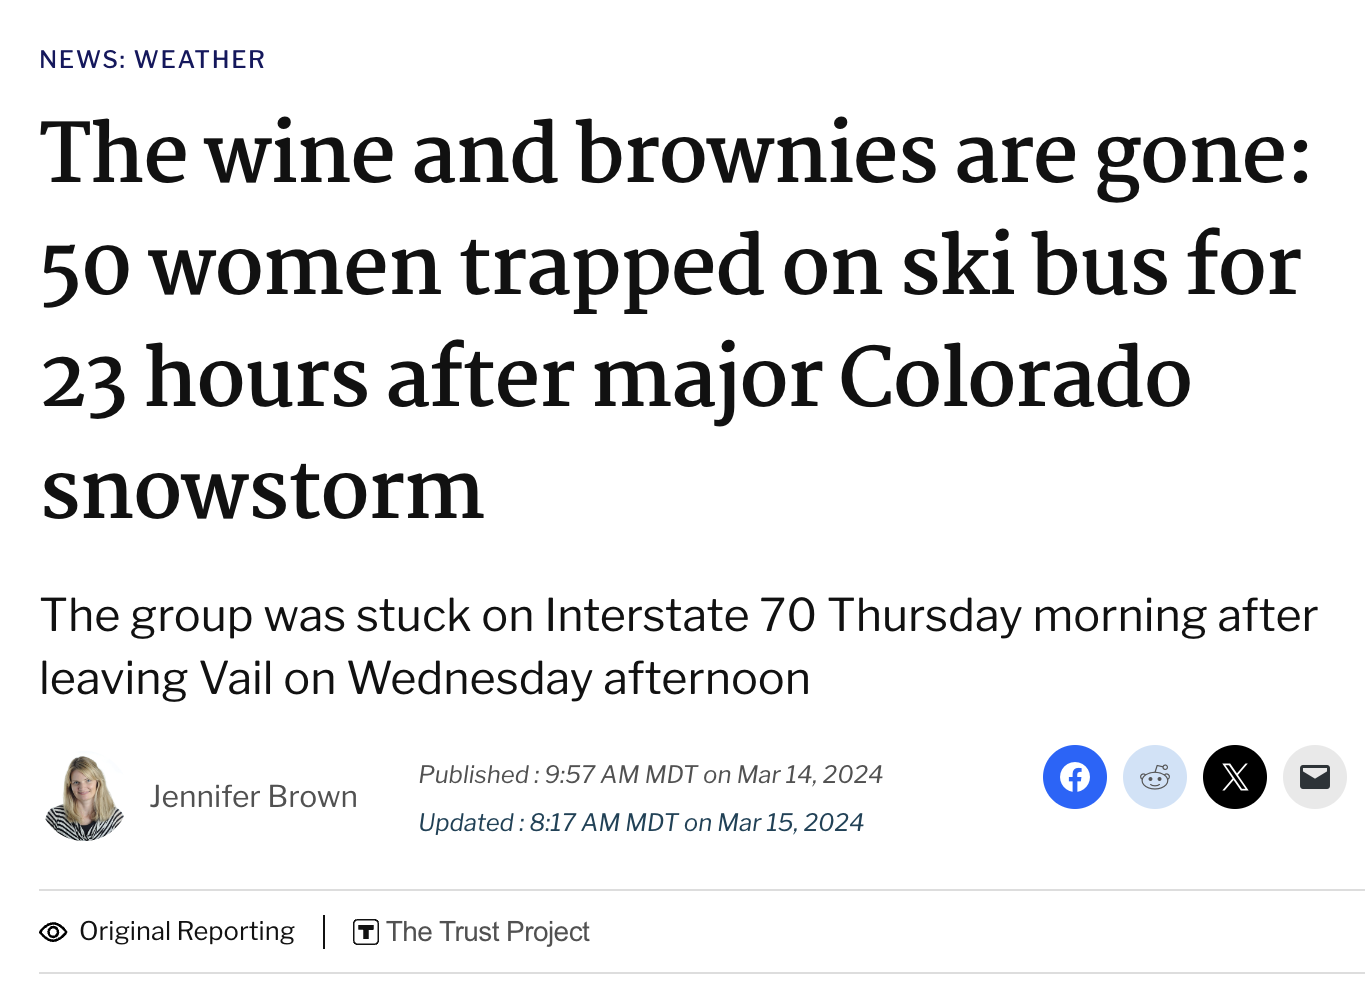 angle - News Weather The wine and brownies are gone 50 women trapped on ski bus for 23 hours after major Colorado snowstorm The group was stuck on Interstate 70 Thursday morning after leaving Vail on Wednesday afternoon Jennifer Brown Published Mdt on Upd